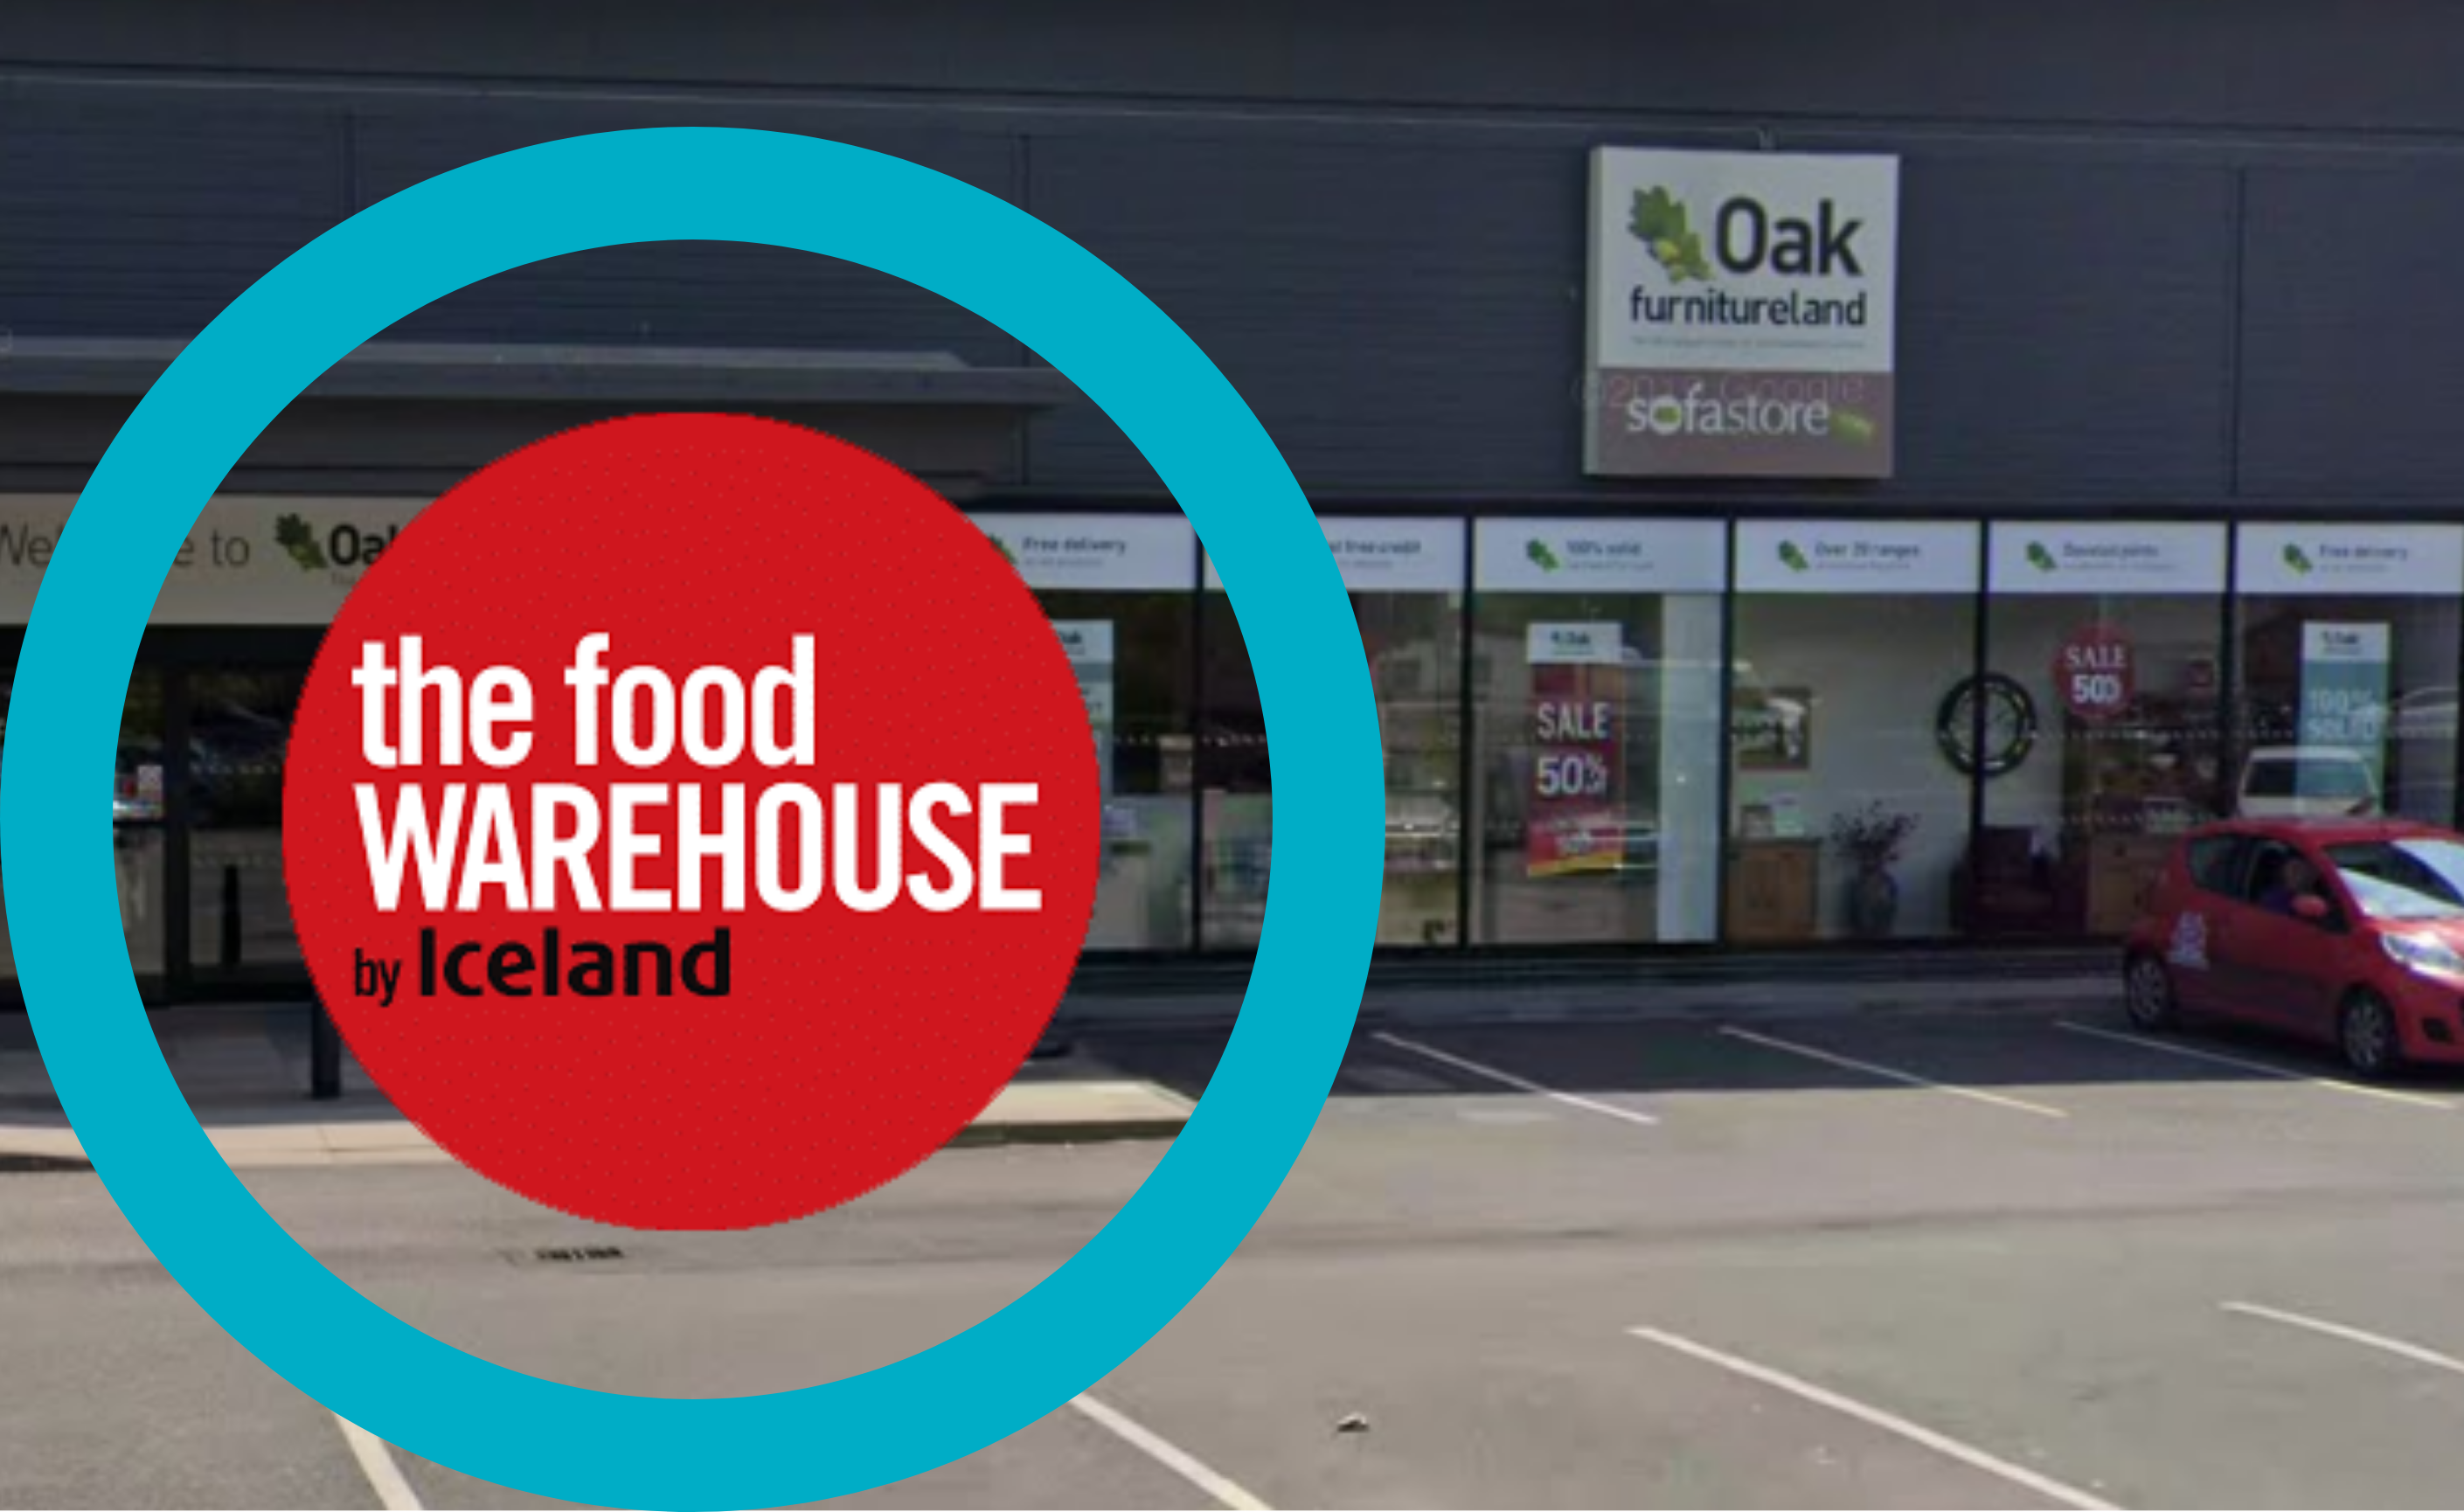 NEWS | Up to 25 jobs to be created when The Food Warehouse opens in Hereford